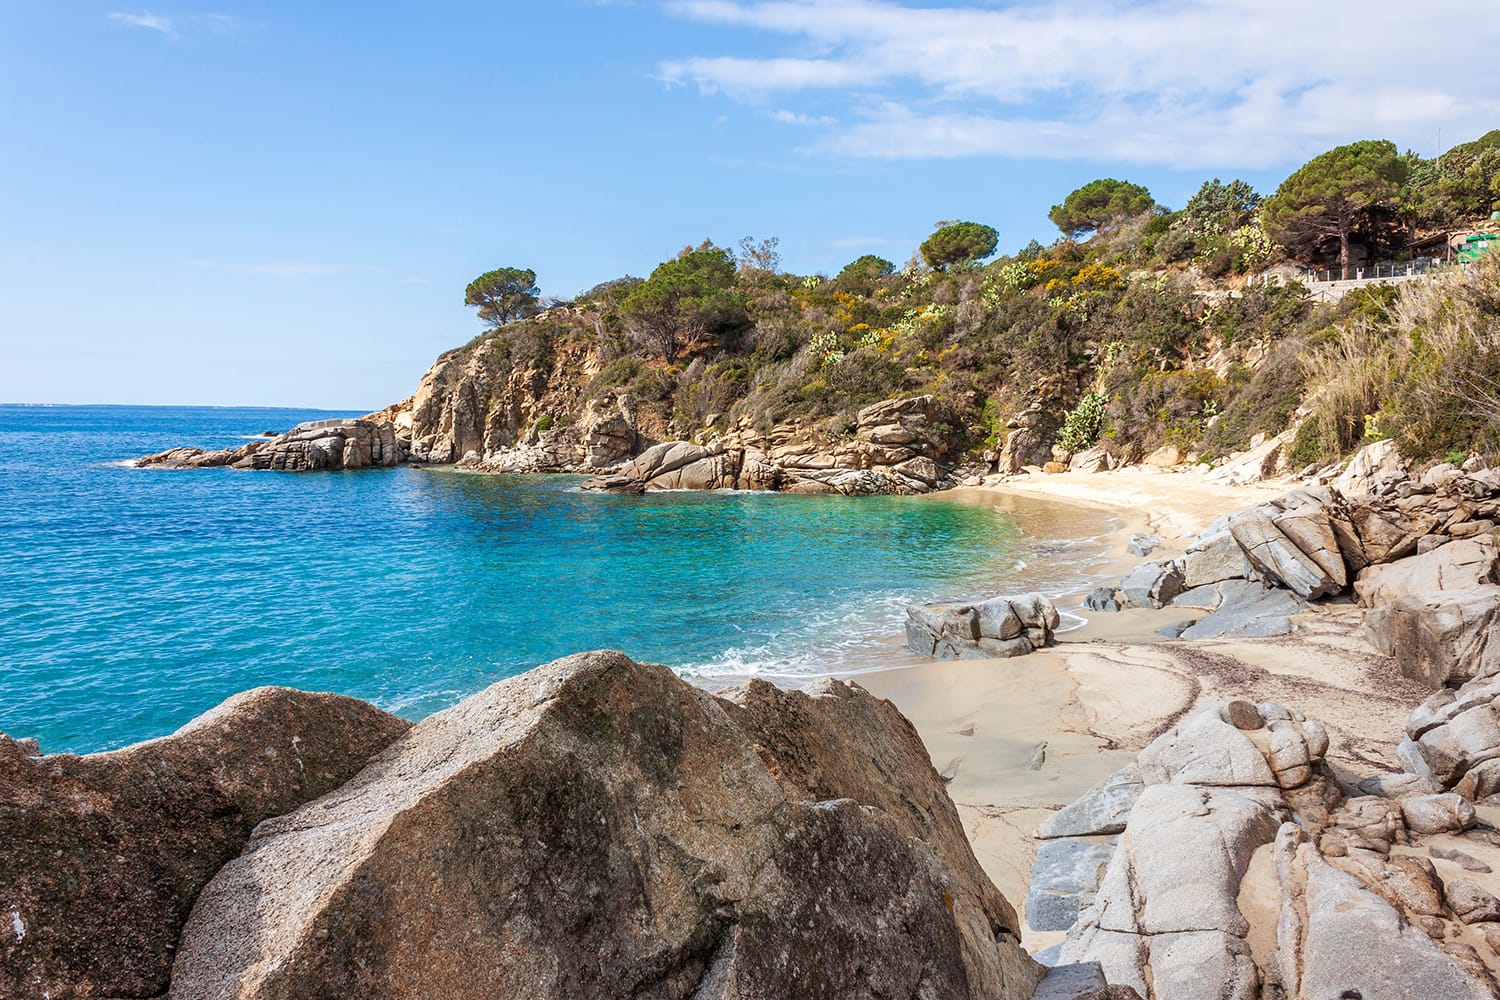 The Beach of Cavoli on Elba island in Italy without people. Tuscan Archipelago national park.